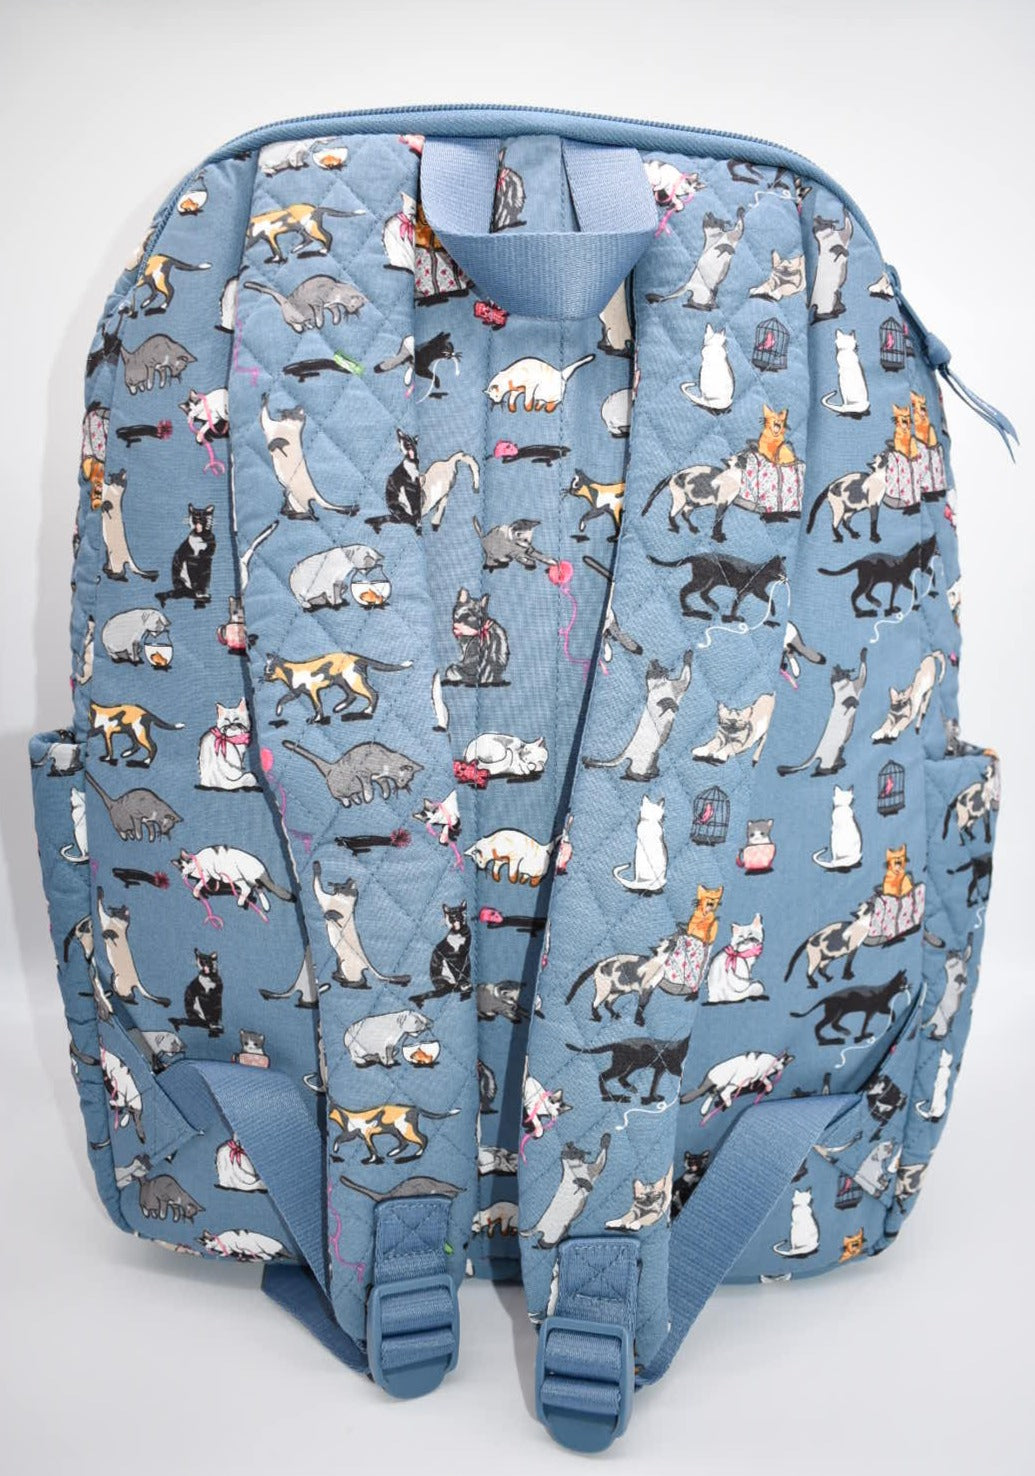 Vera Bradley Large Essential Backpack in "Cat's Meow" Pattern